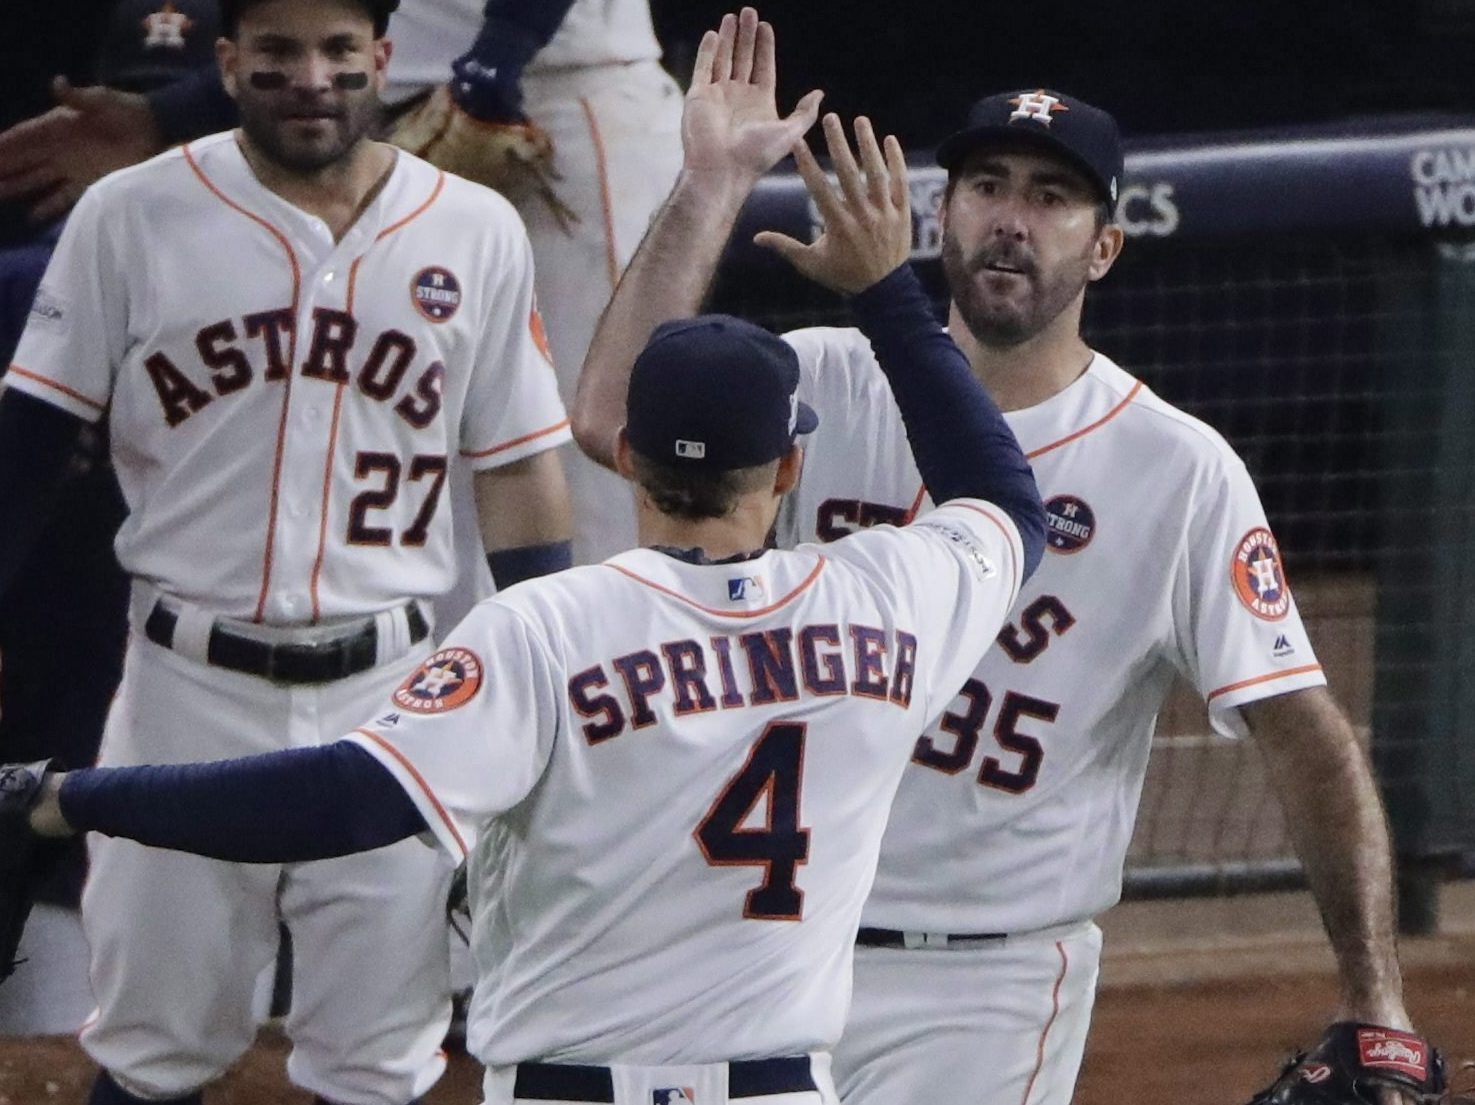 Astros player George Springer took extra time to appreciate one